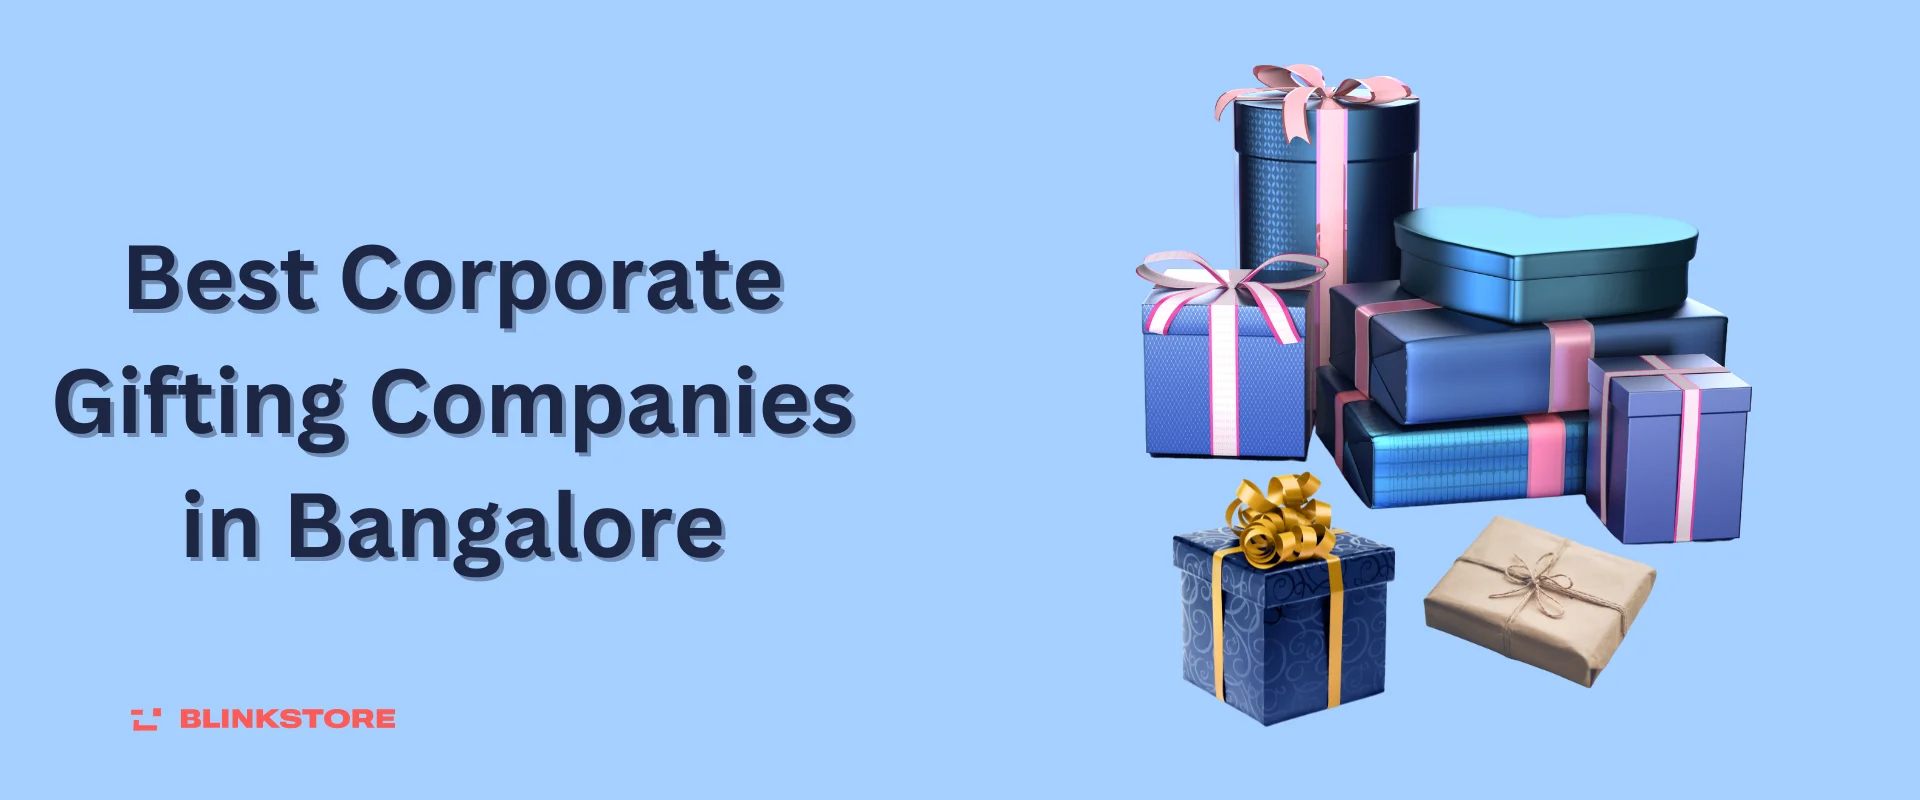 6 Best Corporate Gifting Companies in Bangalore